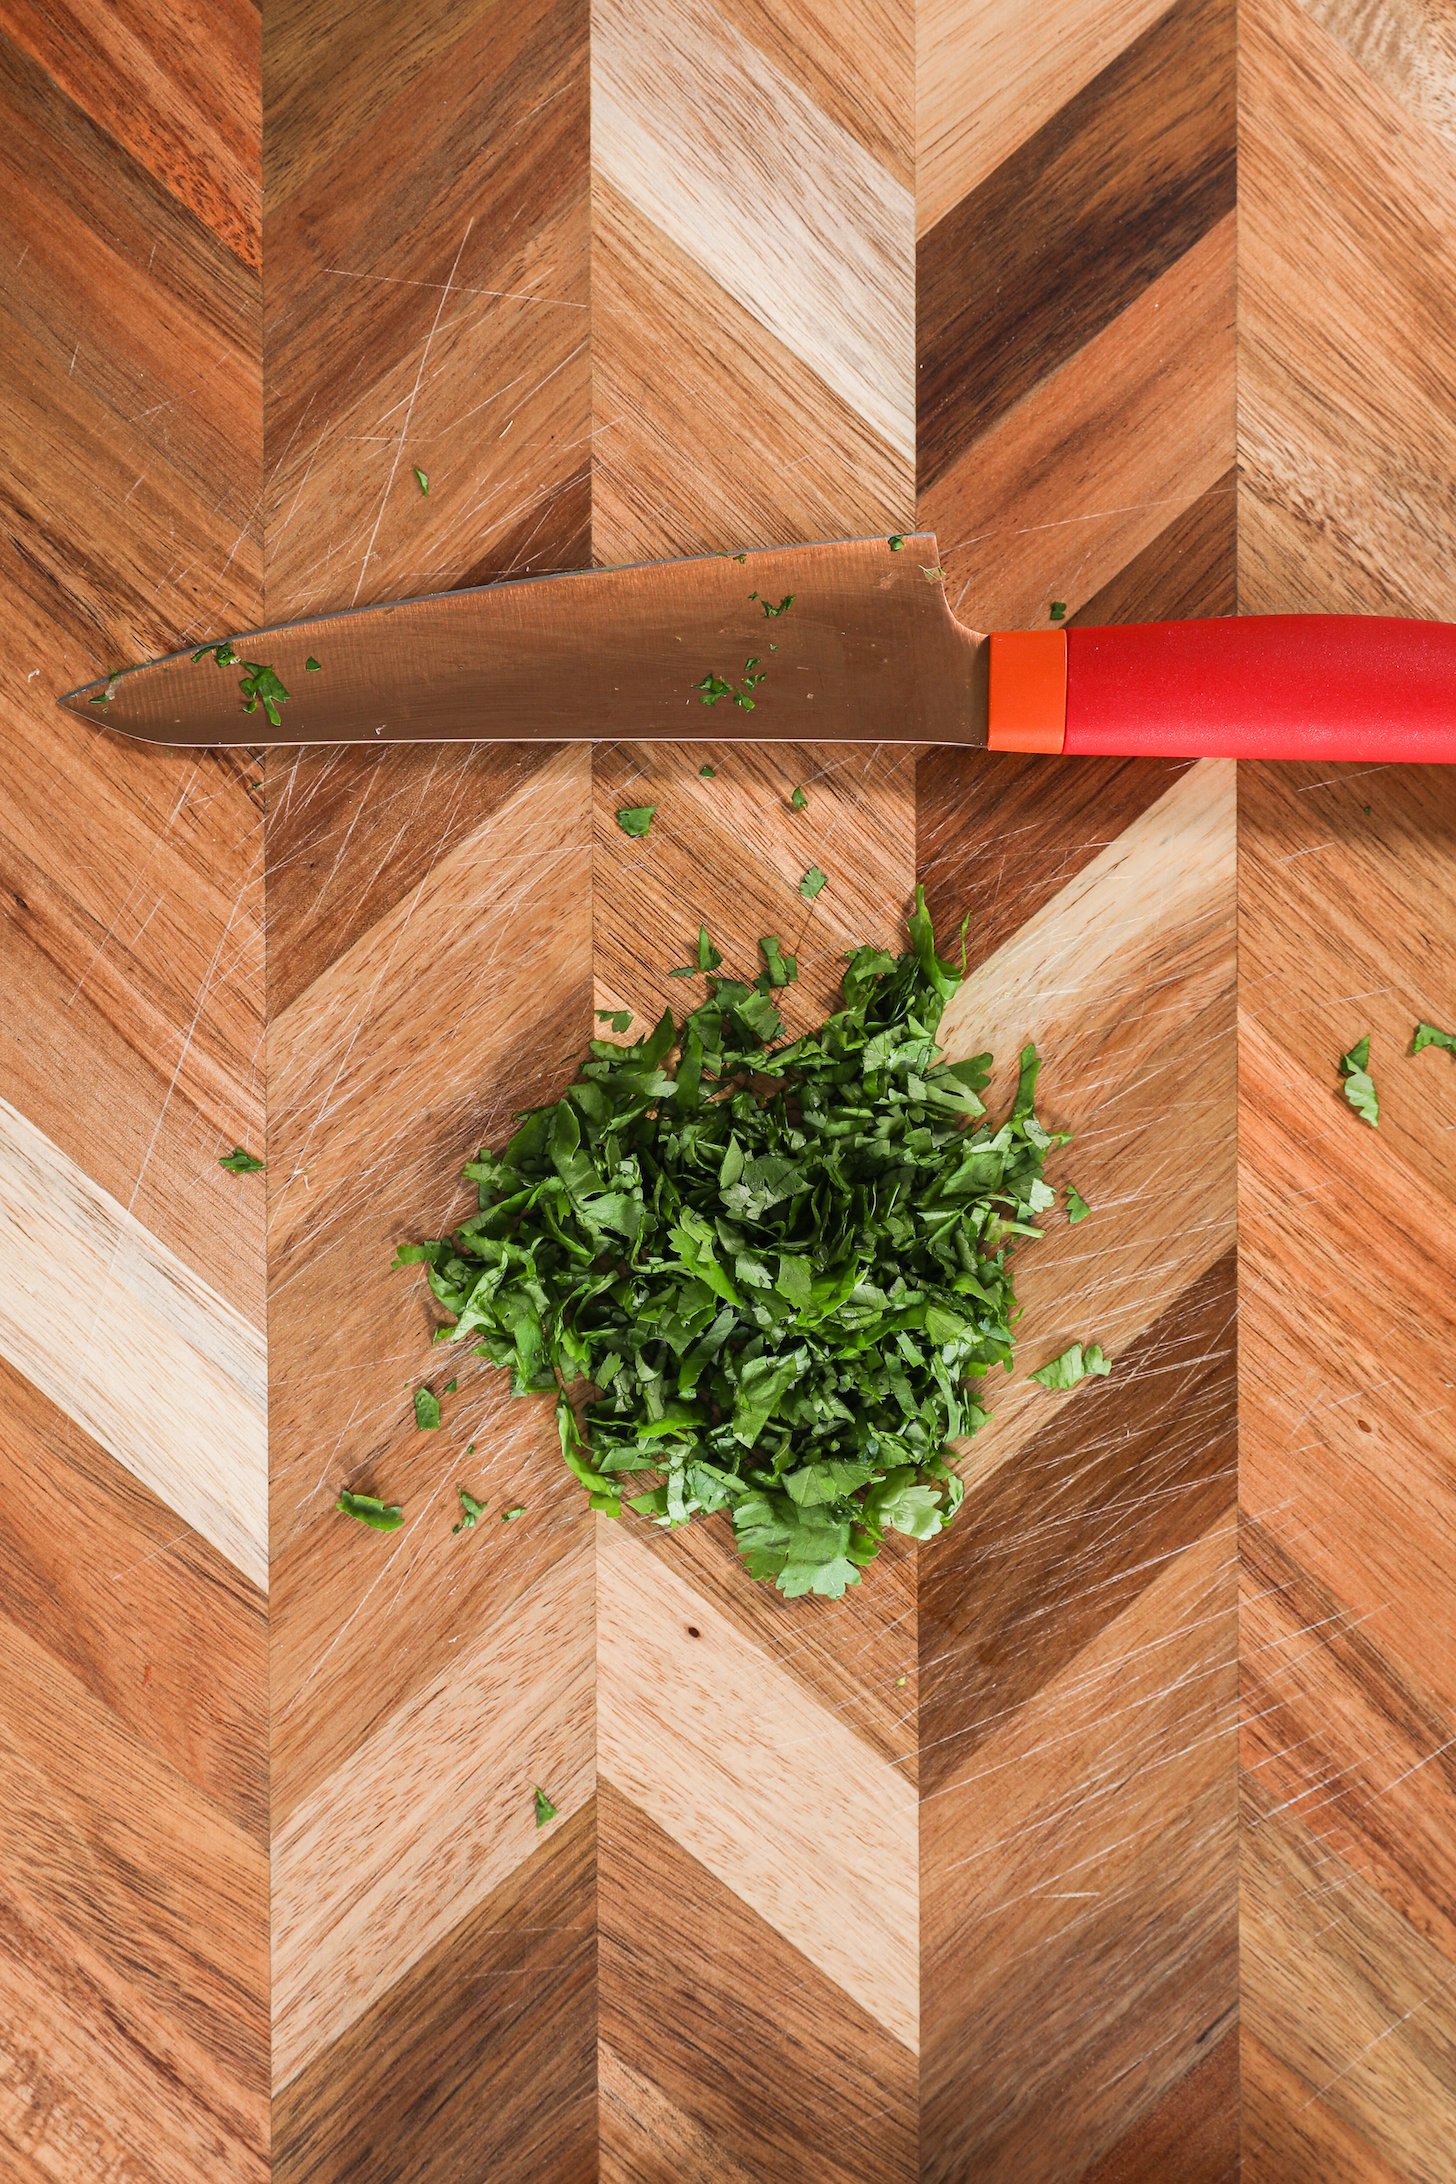 Finely chopped herbs and a knife on a chopping board.